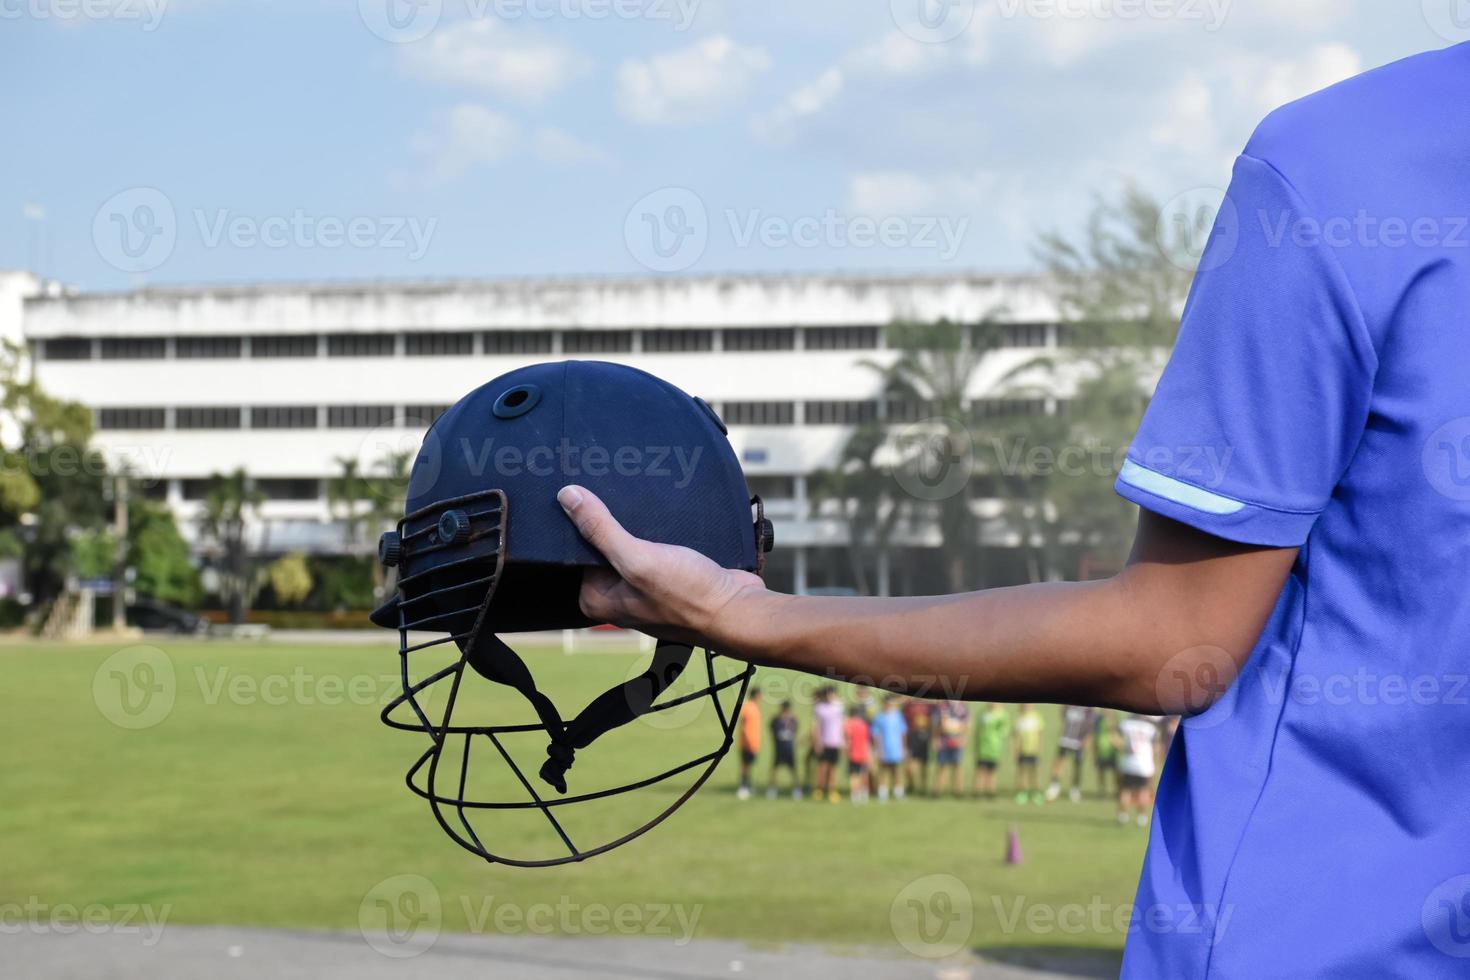 Cricket helmet holding in hand of cricketer, blurred green grass cricket field, concept for using cricket sport equipment in training. photo